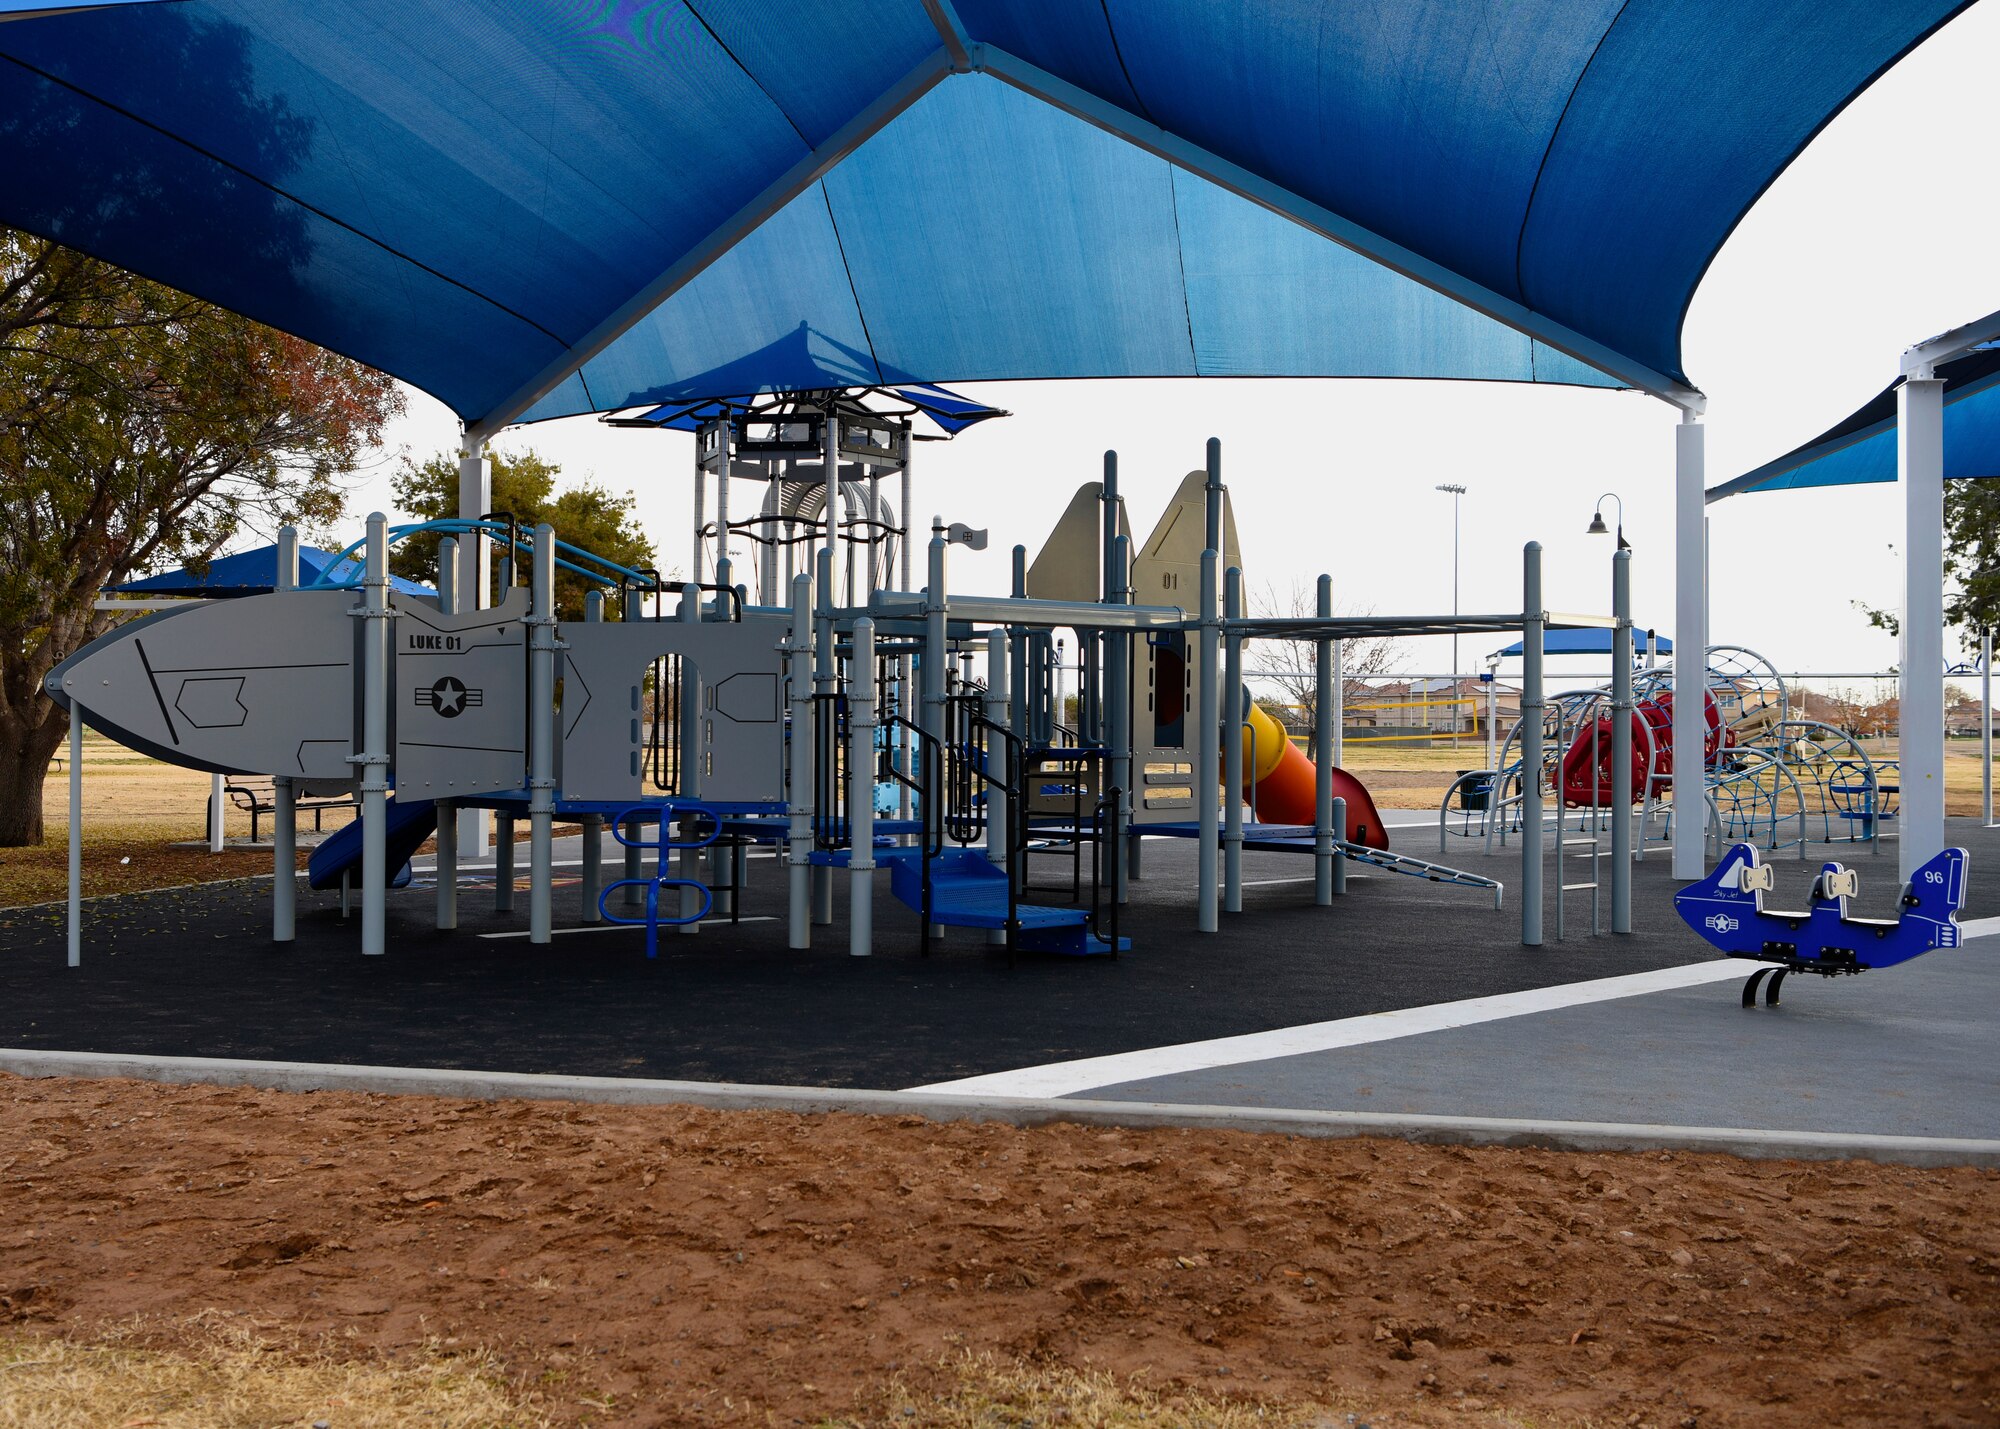 A new playground at Fowler Park was officially opened Jan. 9, 2018, at Luke Air Force Base, Ariz.